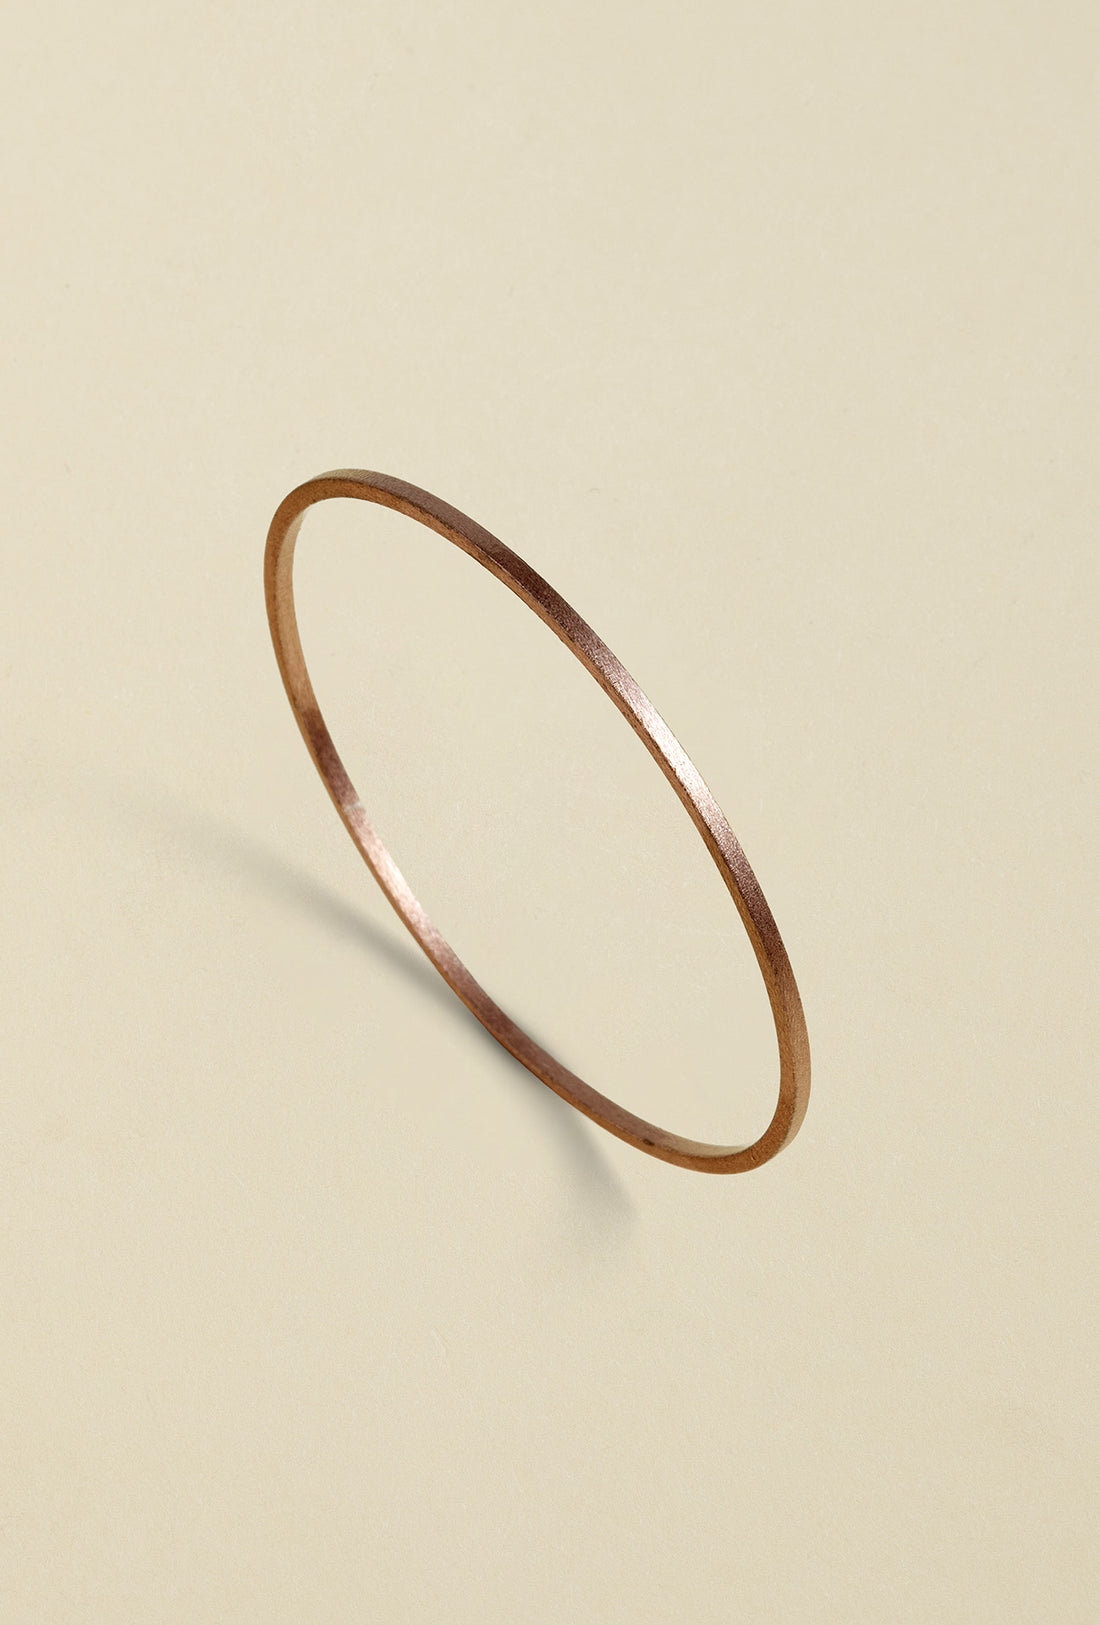 Handcrafted bronze bangle with bronze coloring